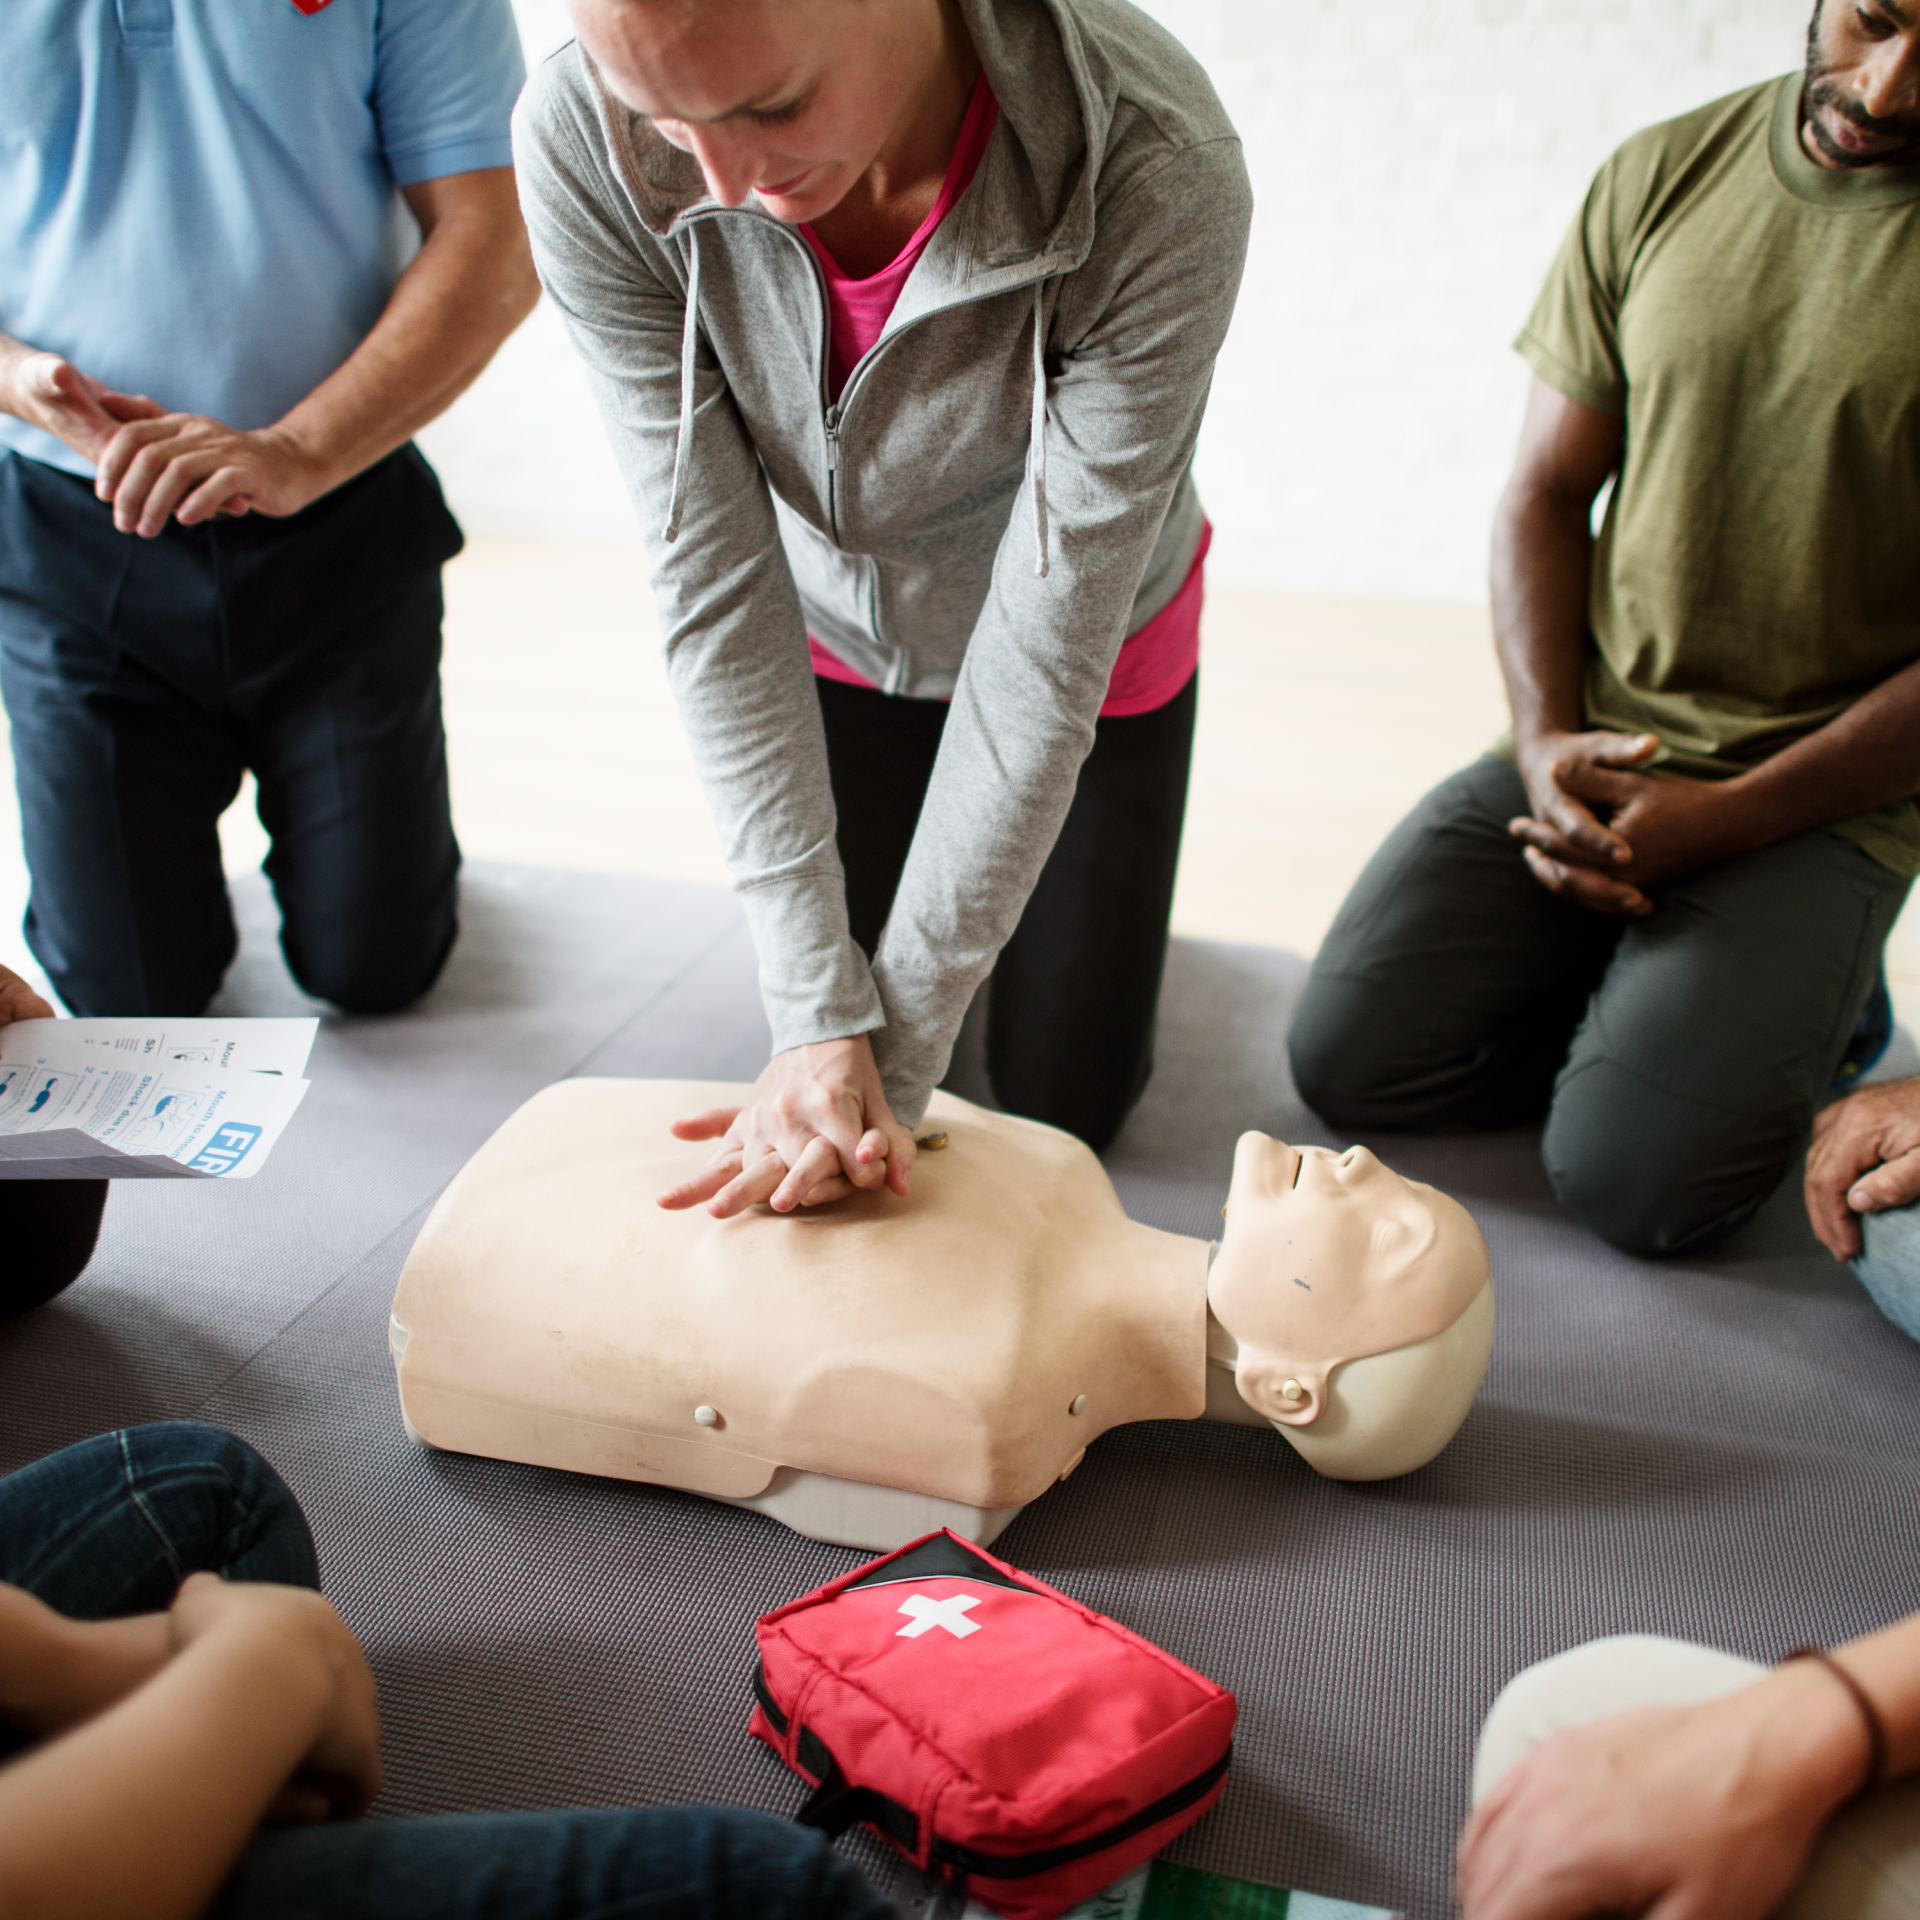 Photo of someone practicing cpr on a dummy while other people watch